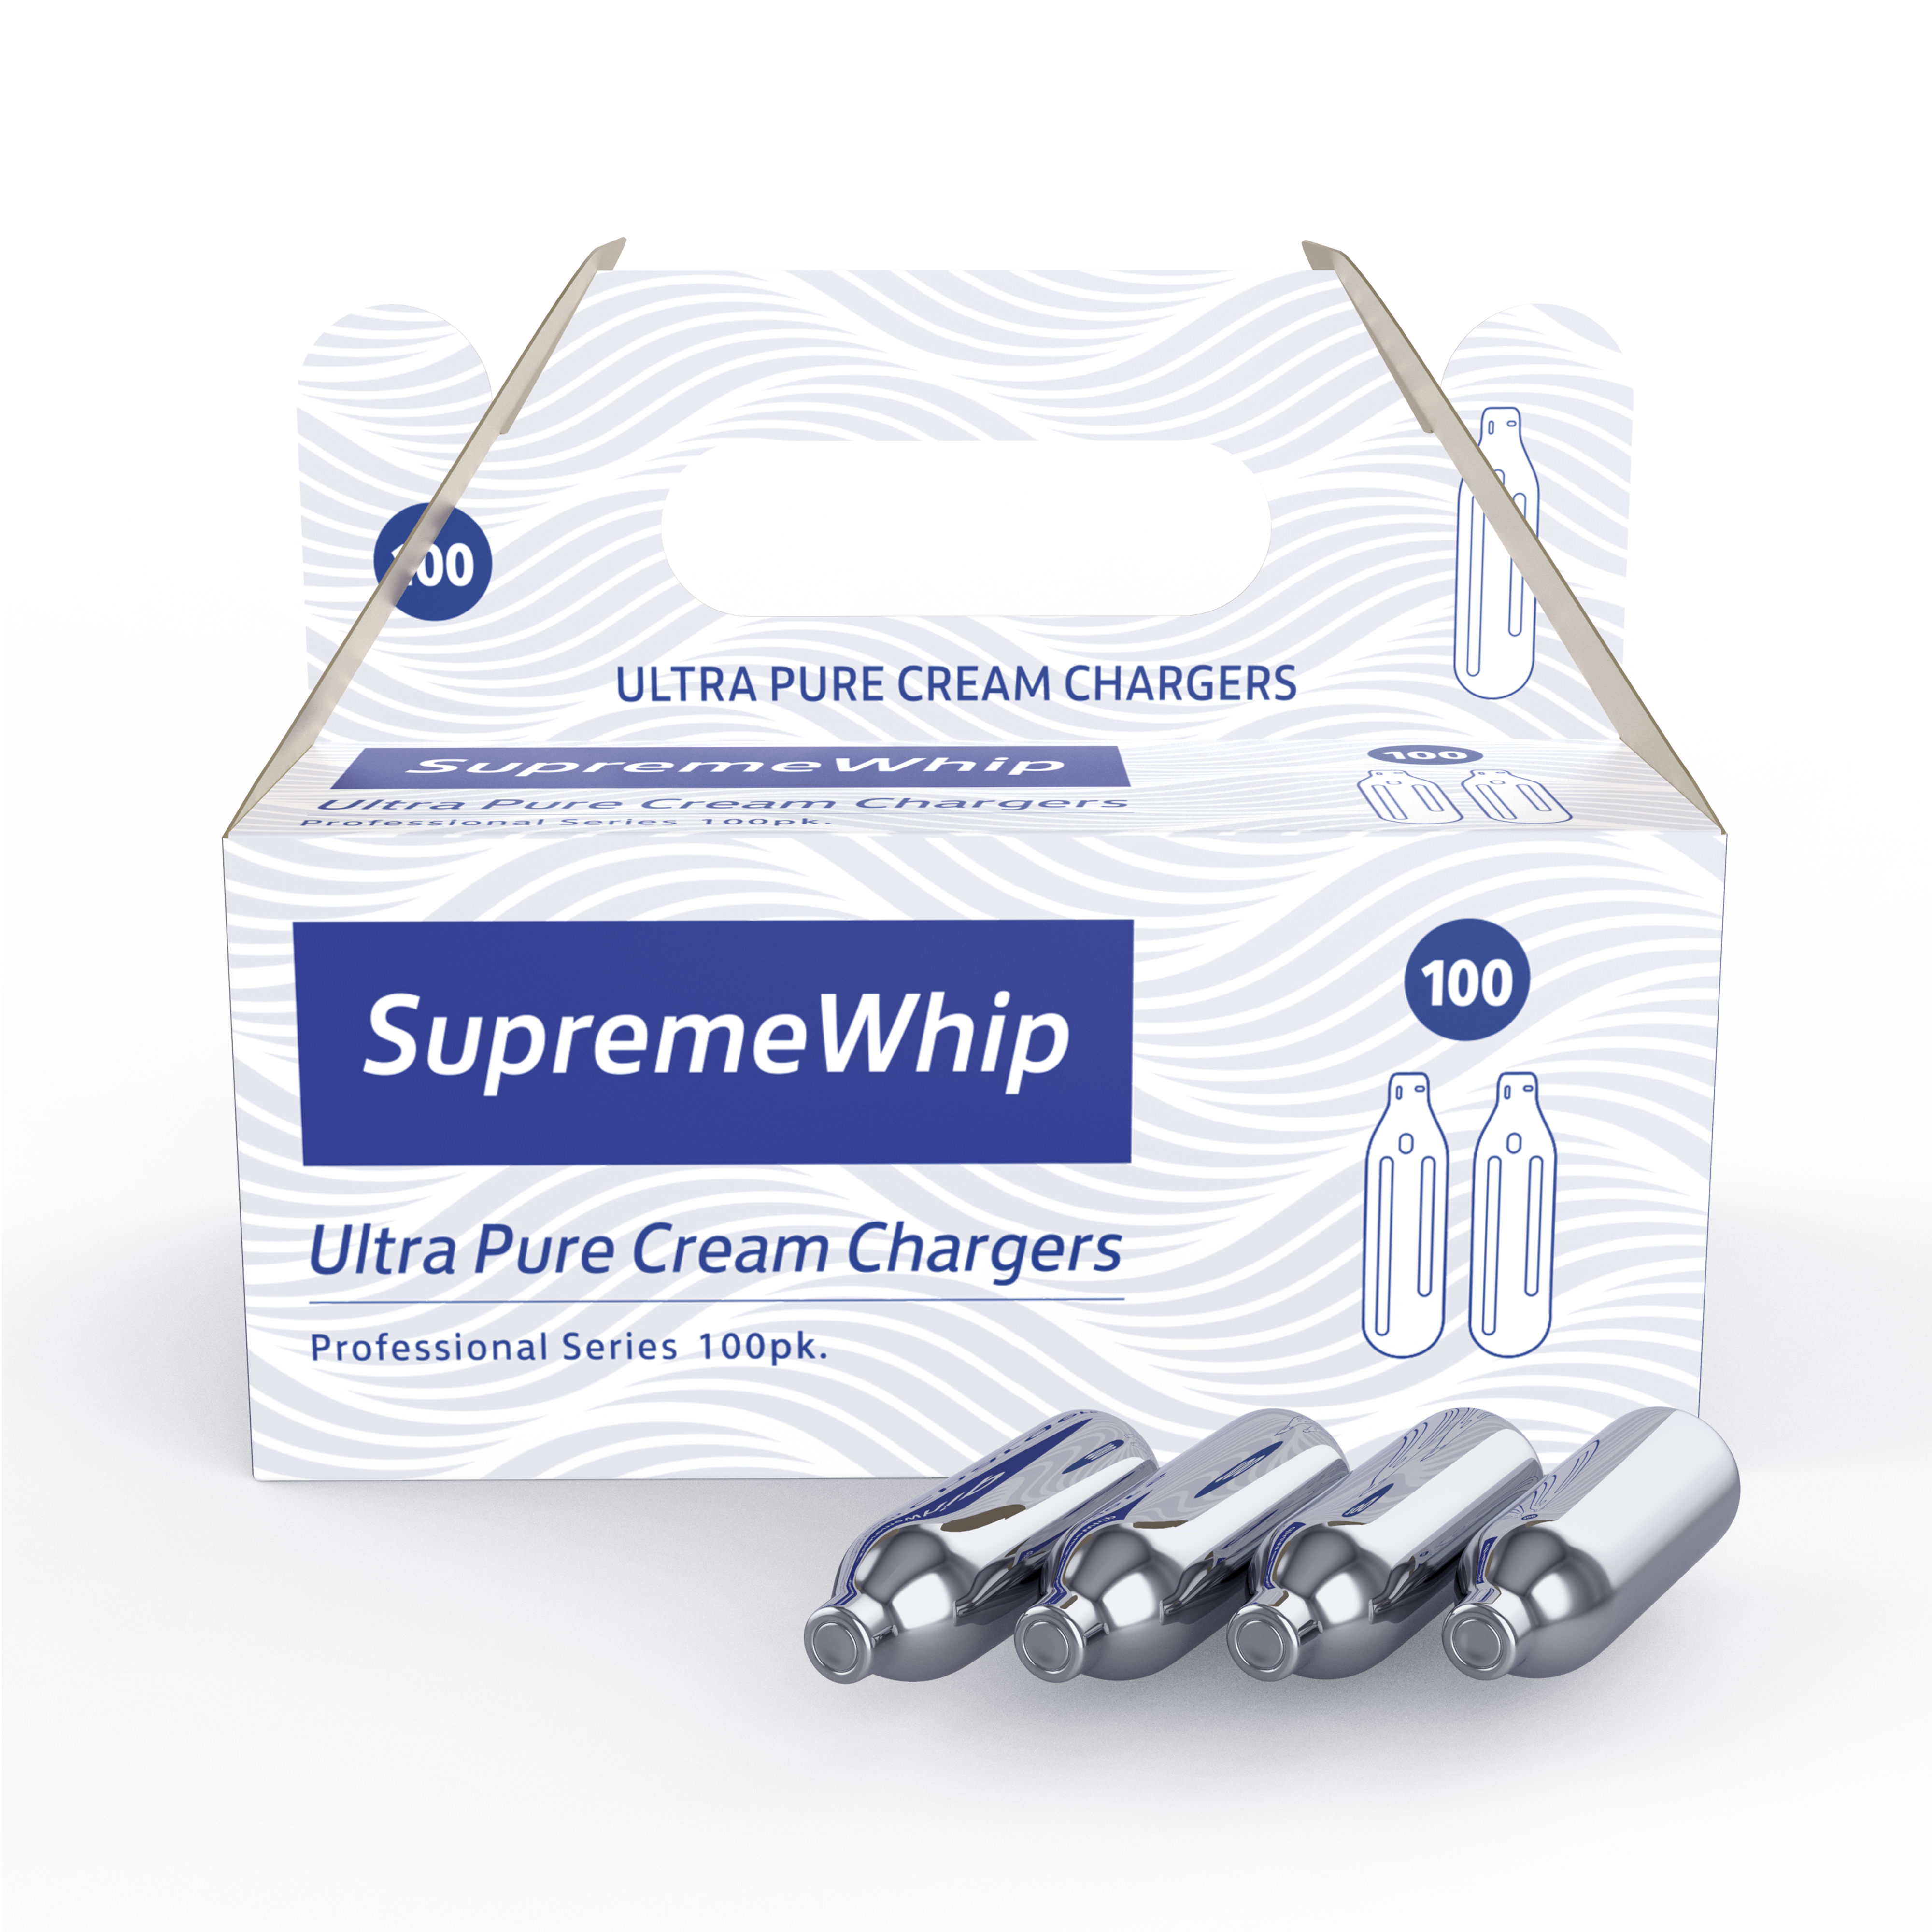 SupremeWhip Cream Chargers - 100 Pack WHOLESALE